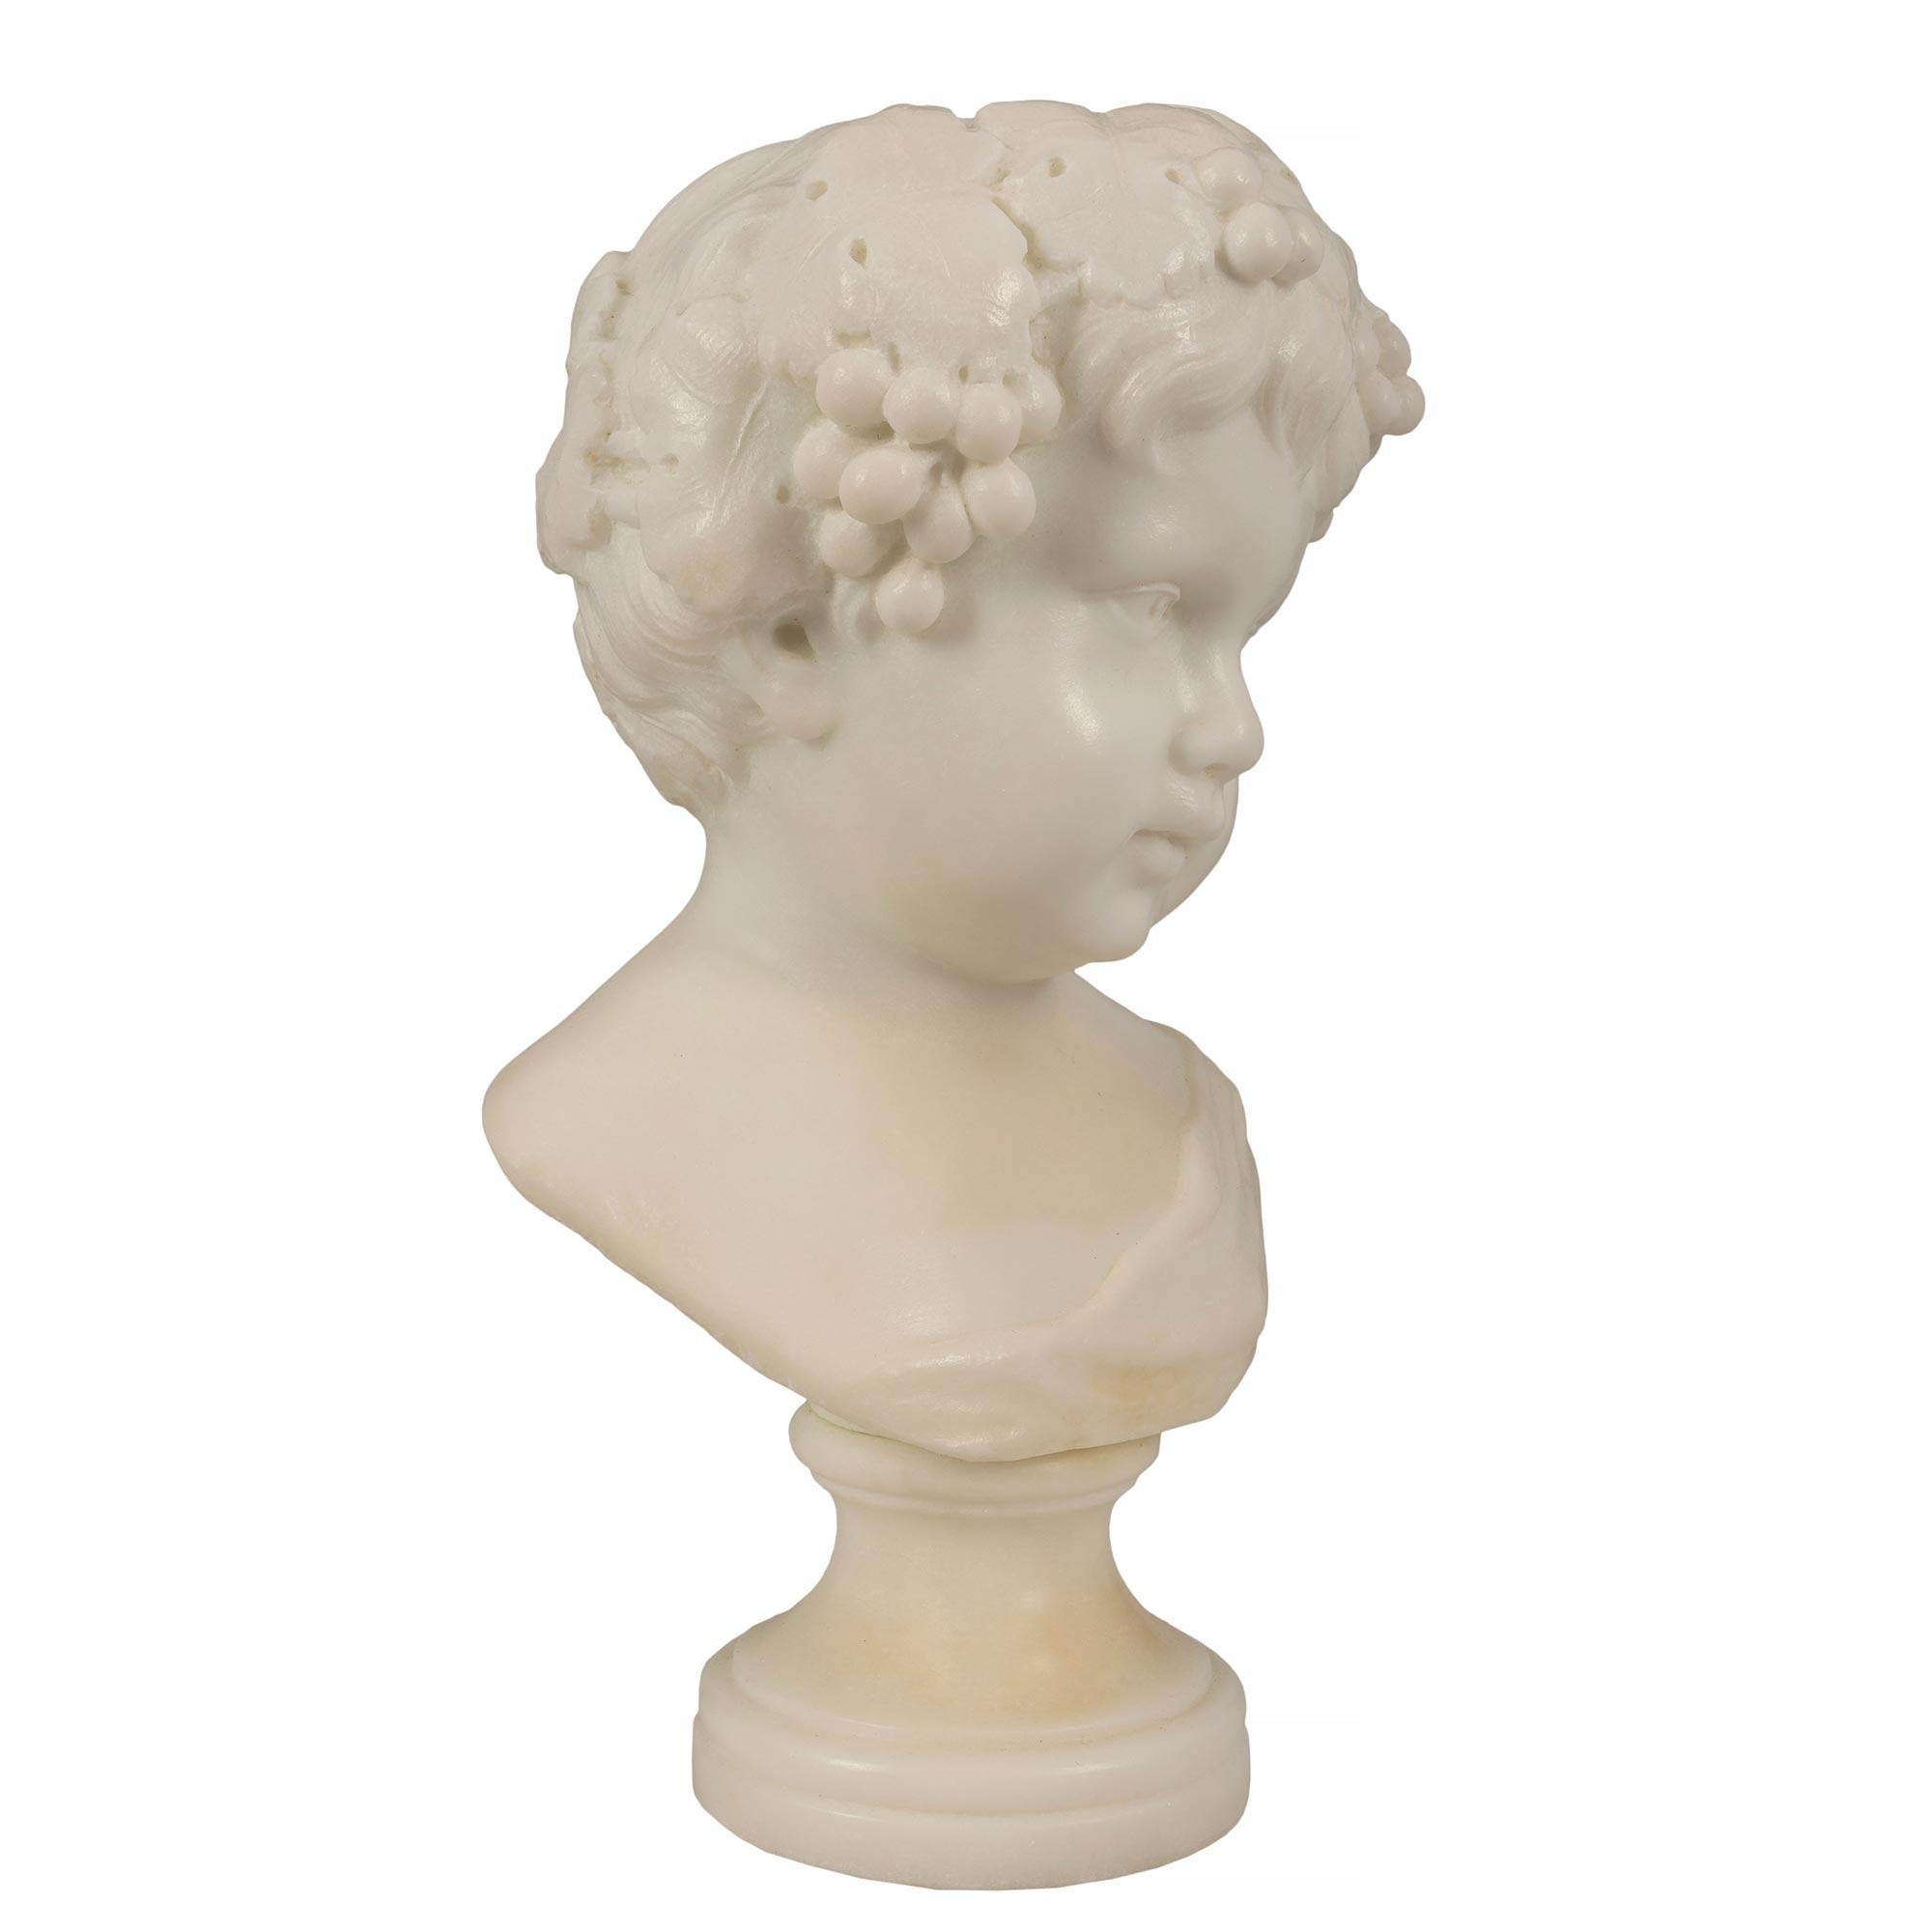 A charming pair of Italian 19th century white Carrara marble bust of young Bacchus. Each bust is raised by circular socle pedestals. With wonderful smiling expressions and a crown of grape clusters in their hair. Extremely decorative.

